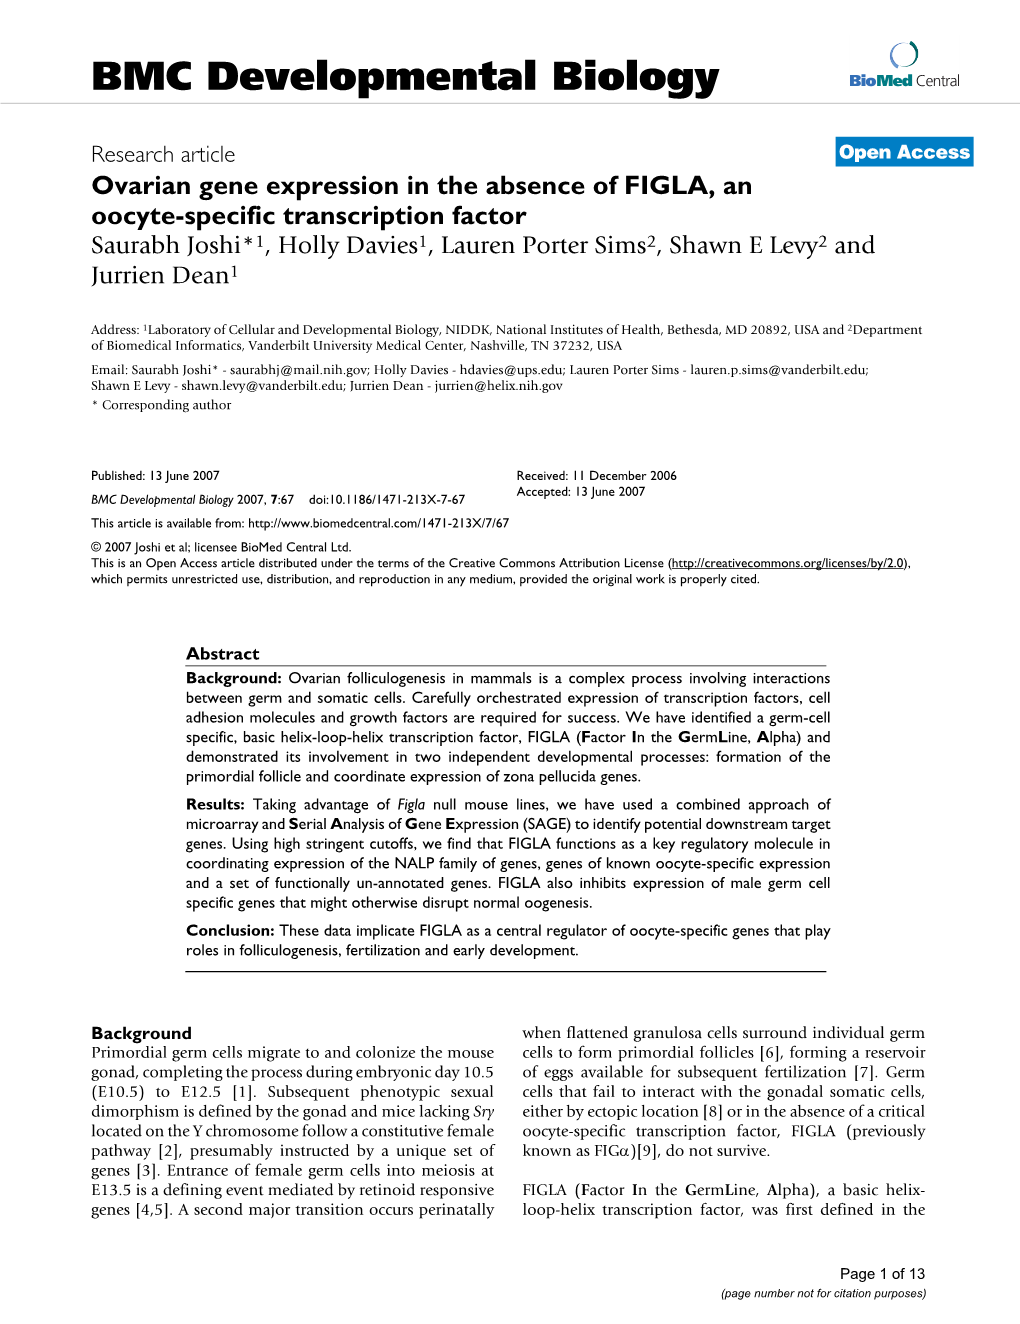 Ovarian Gene Expression in the Absence of FIGLA, an Oocyte